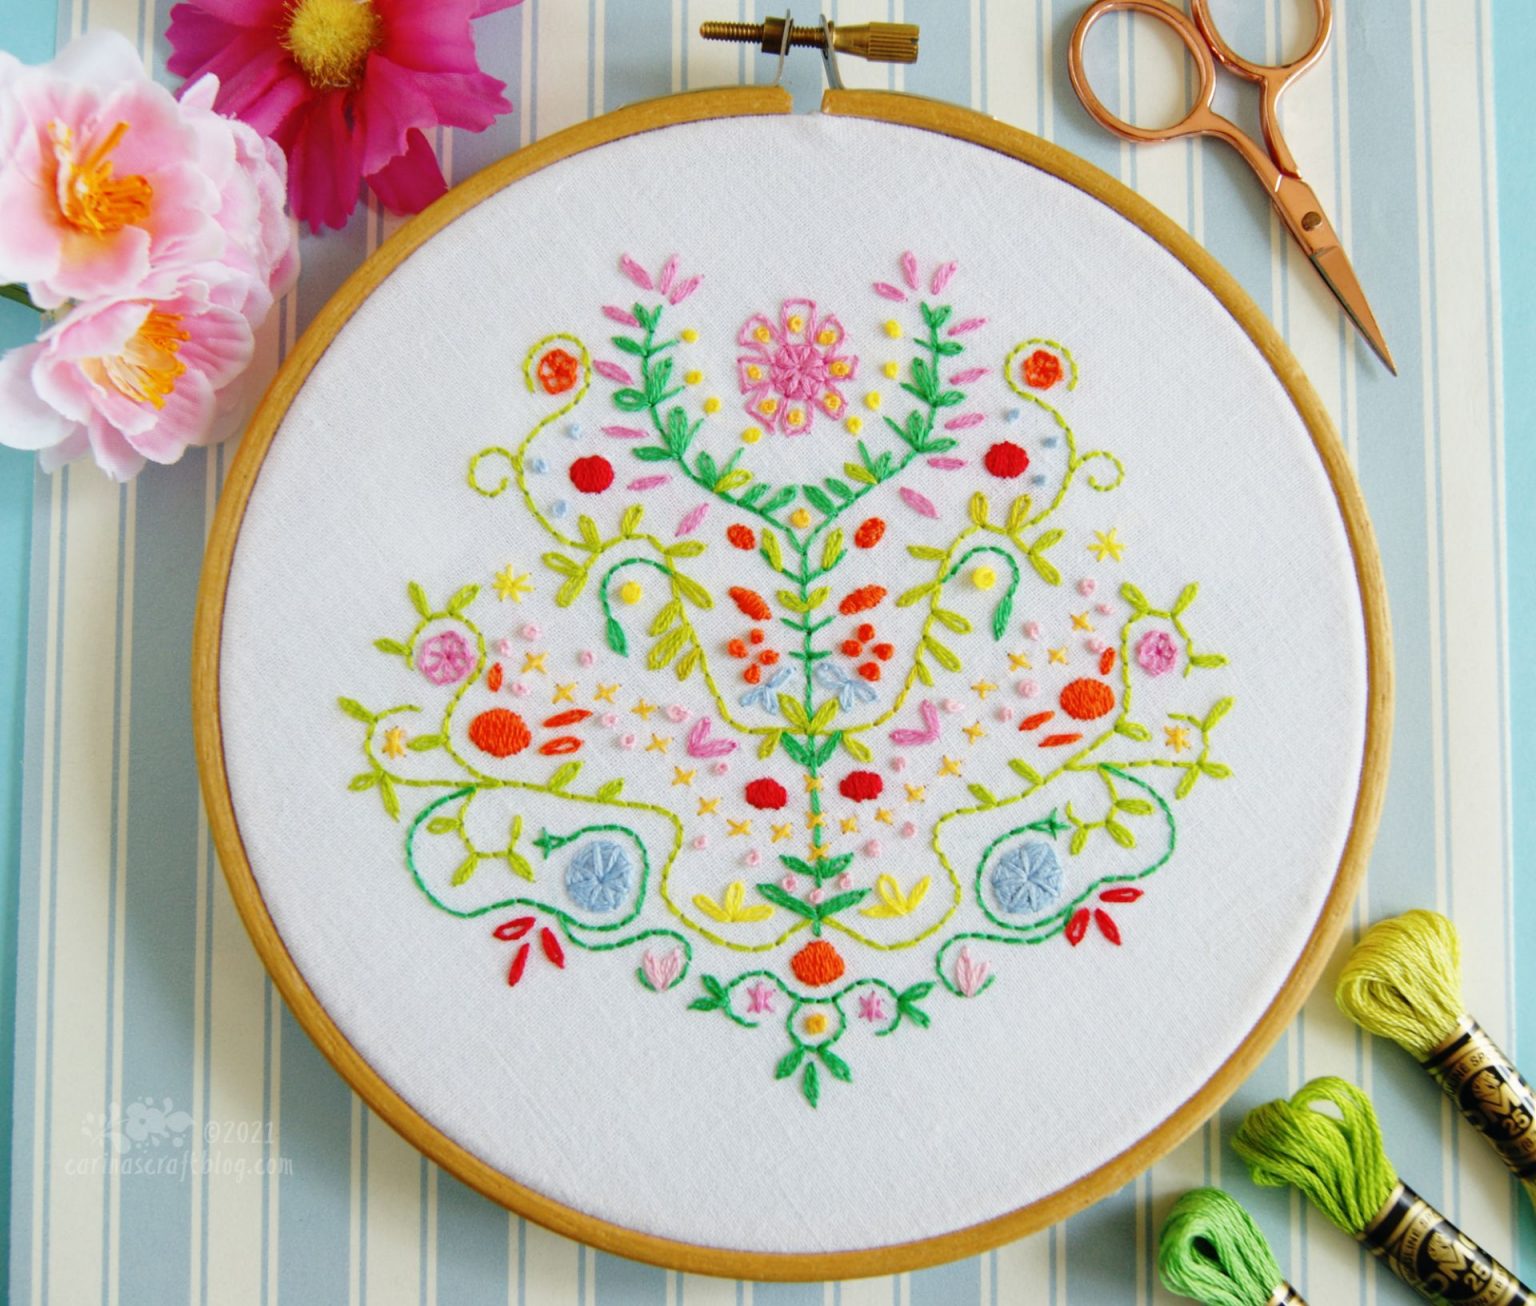 Embroidery from The Past – Carina's Craftblog